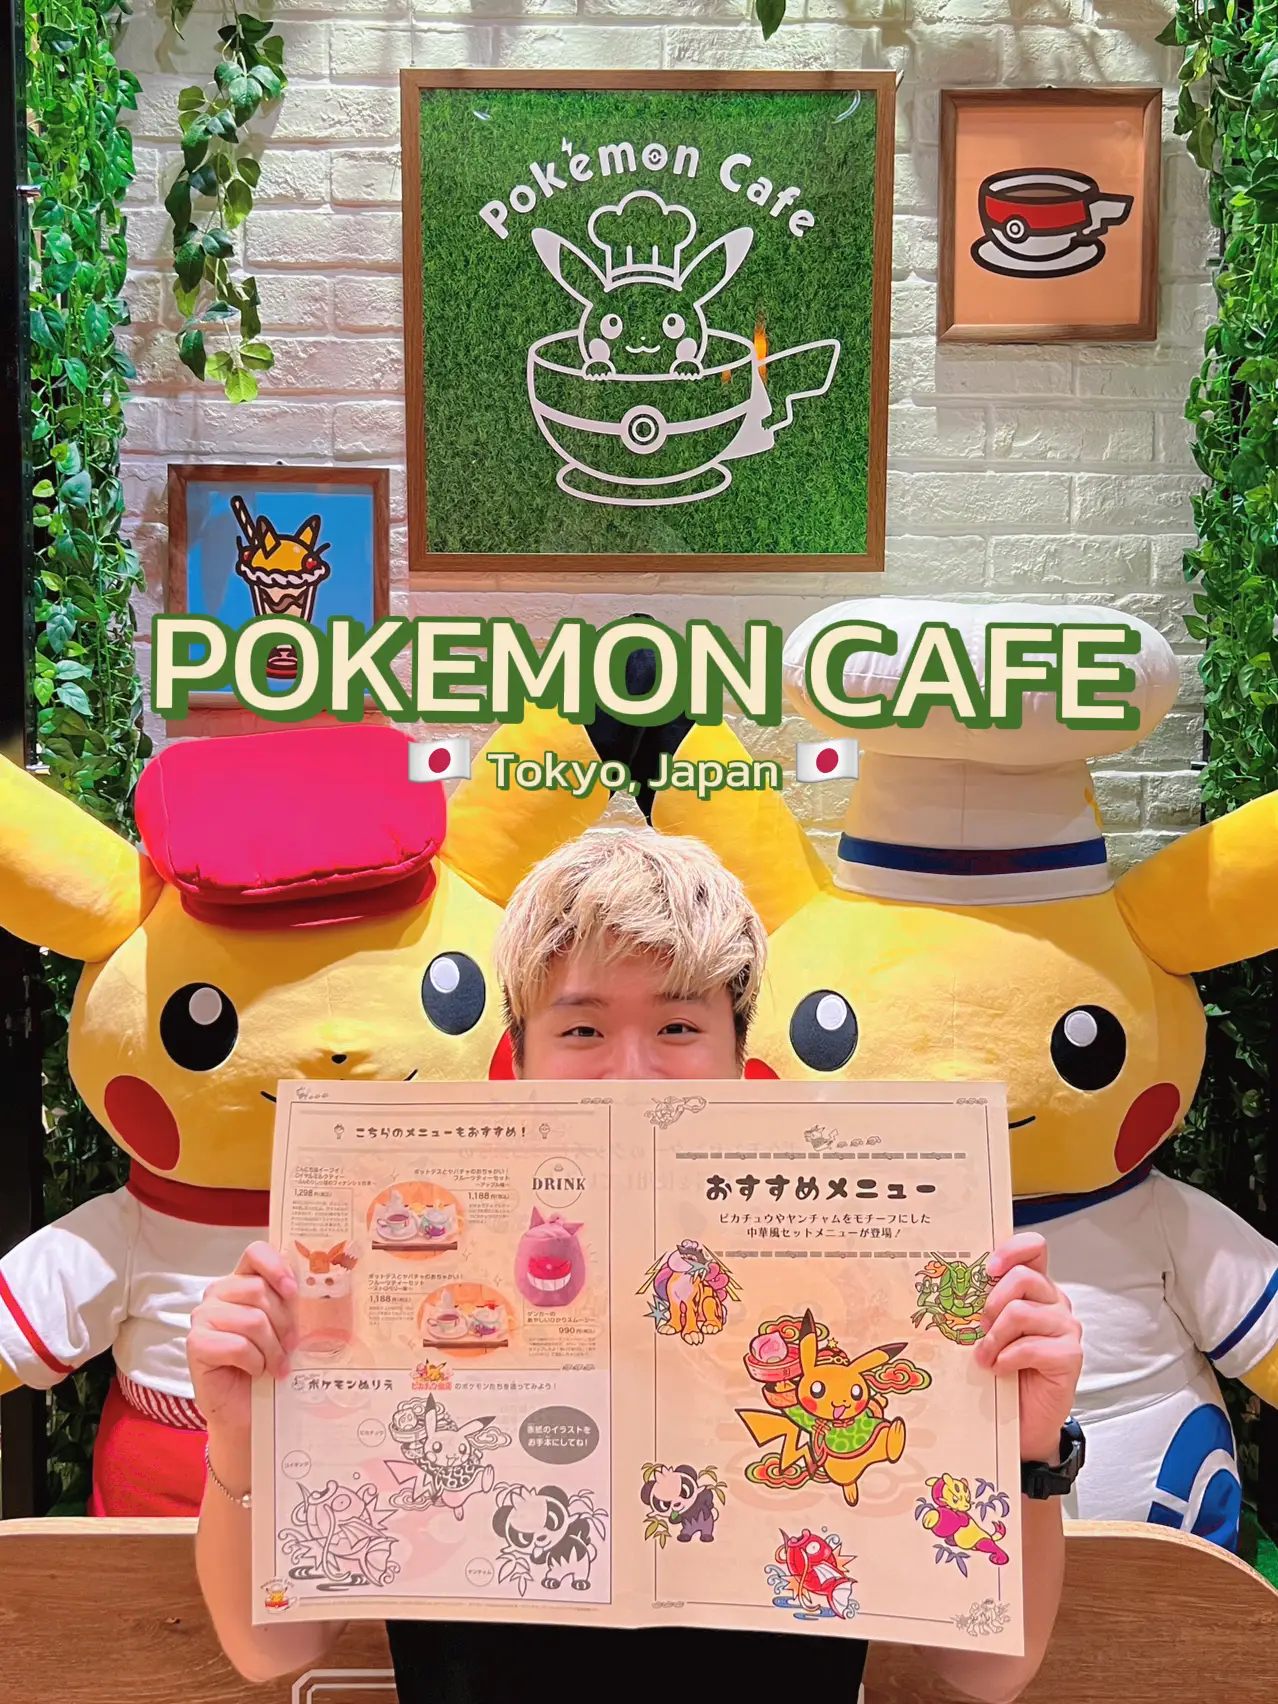 The Pokemon Center in Kyoto is truly one of a kind! 💛